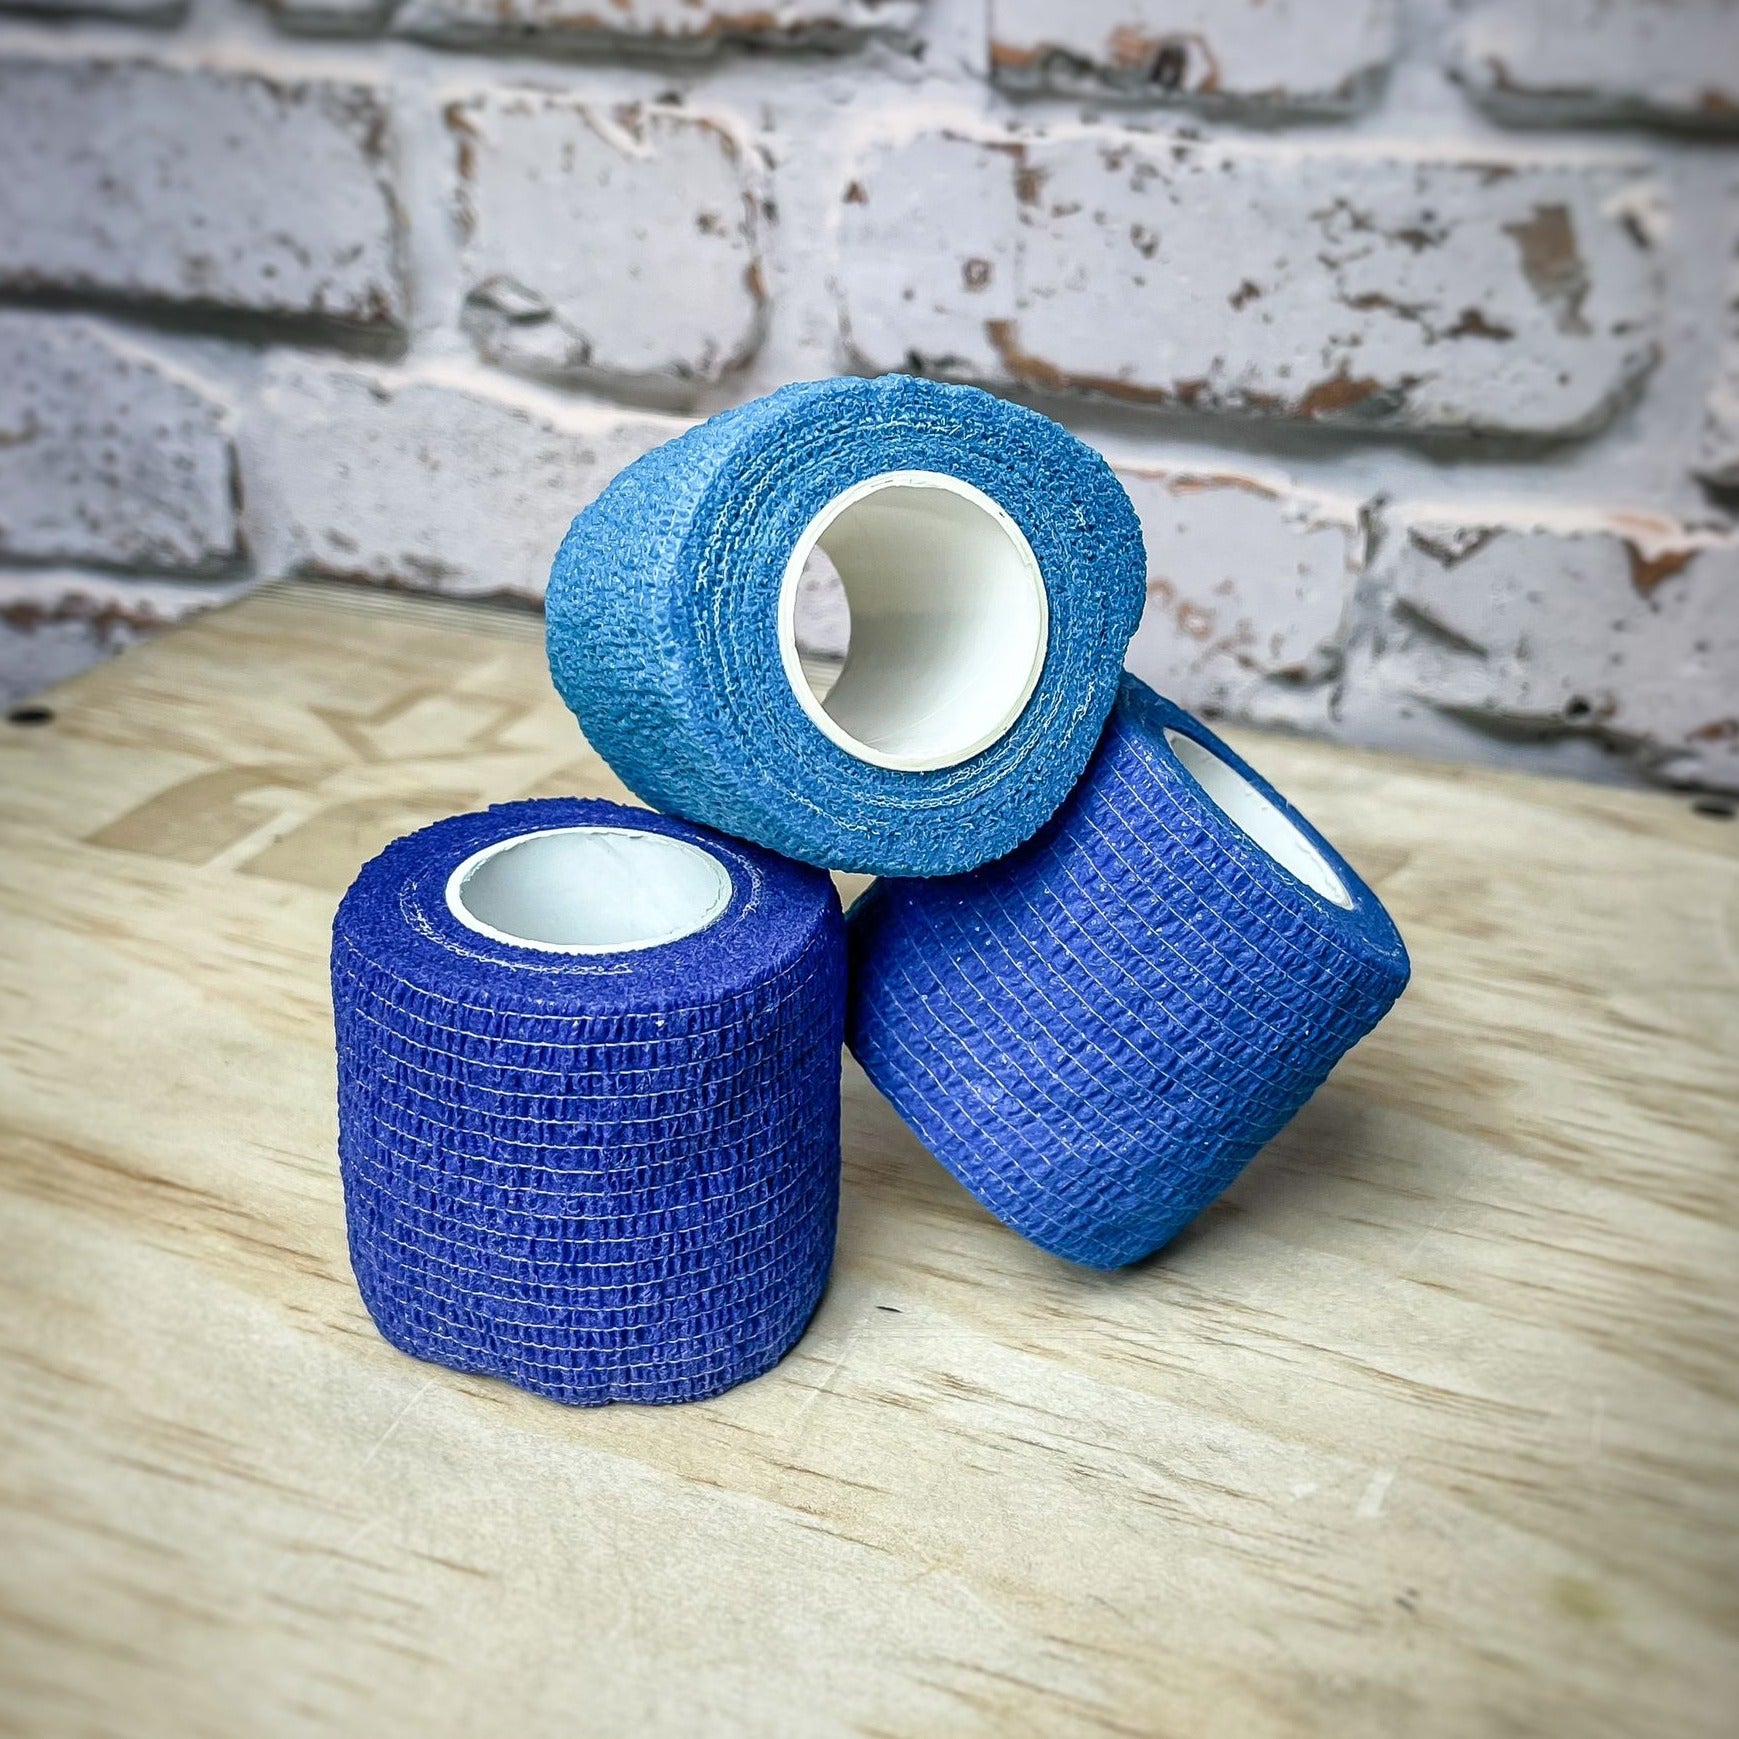 Summum Fit Thumb Tape Weightlifting - Blue Hook Grip Tape Flexible, Durable  & Easy to Apply. Sweat Proof Lifting Tape That Stays Put During Intense